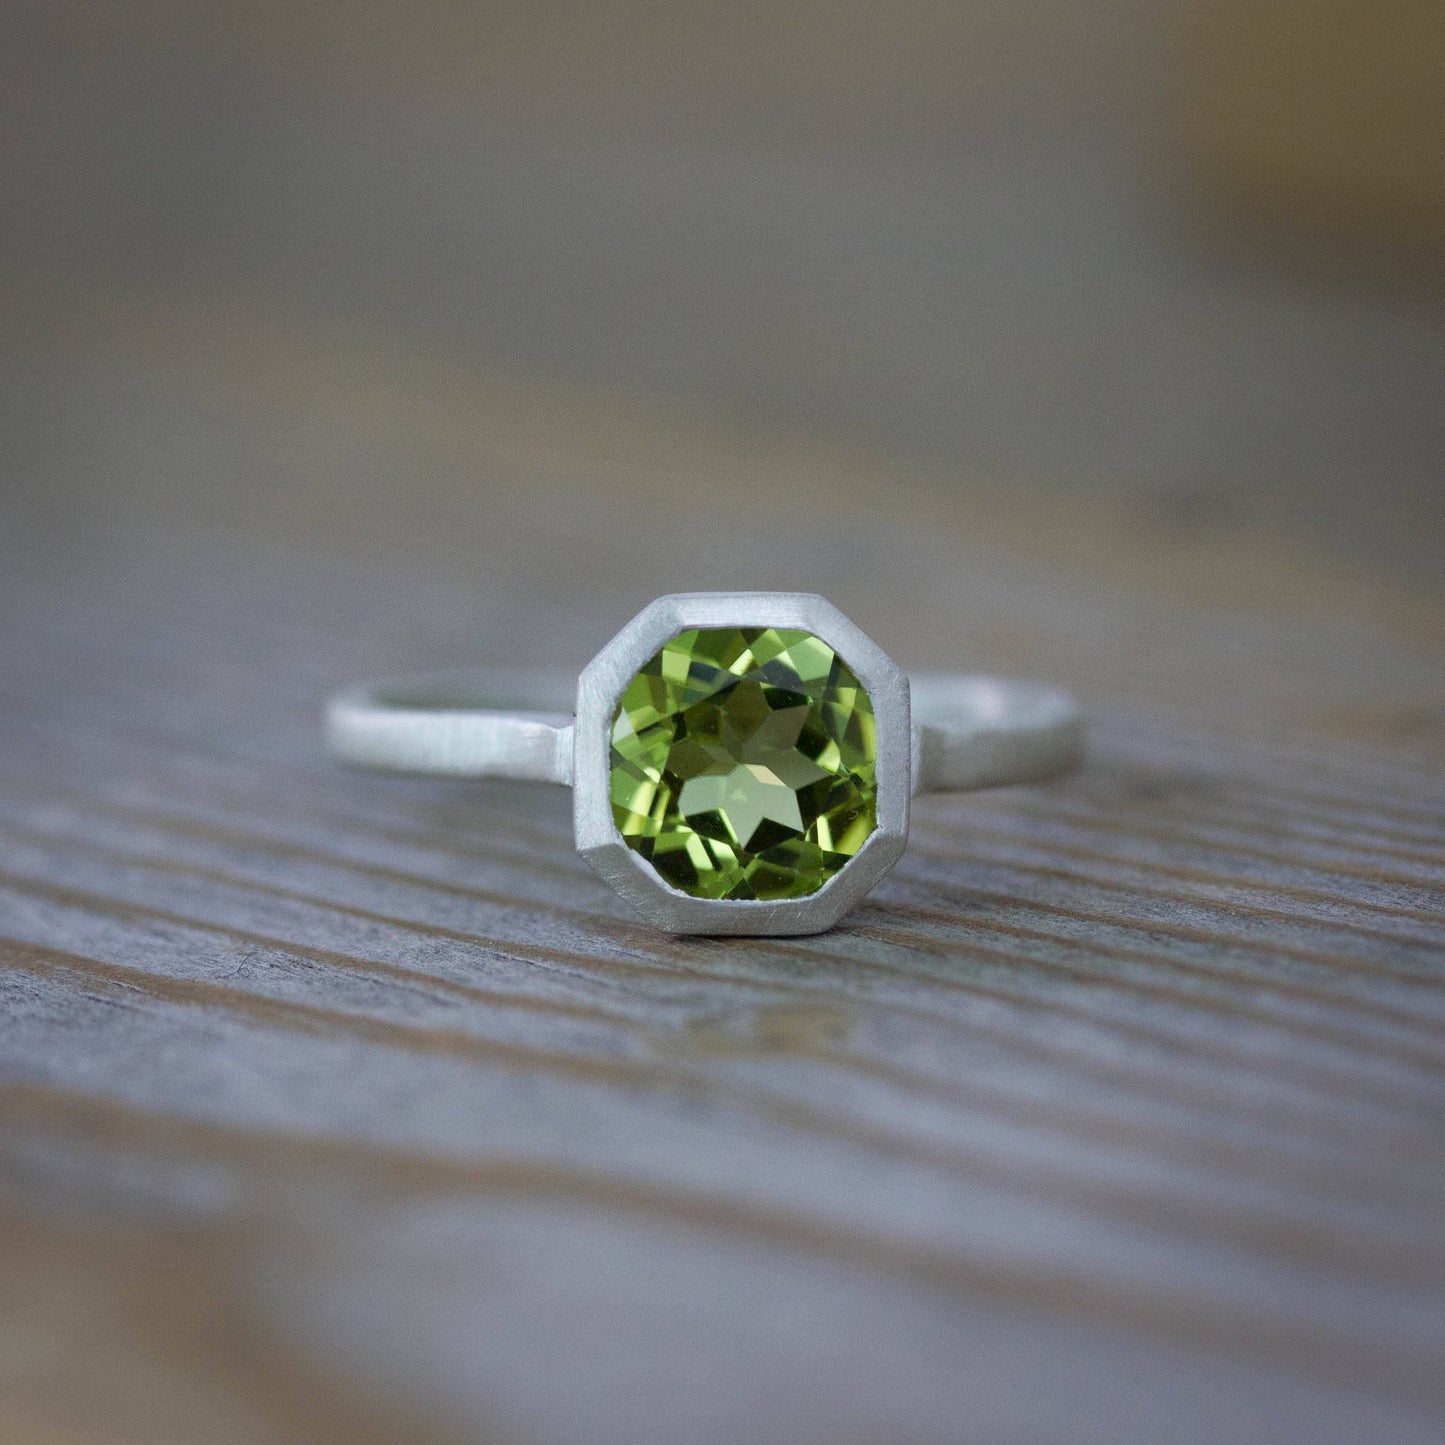 A handmade Peridot Ring in August Birthstone on a wooden table.